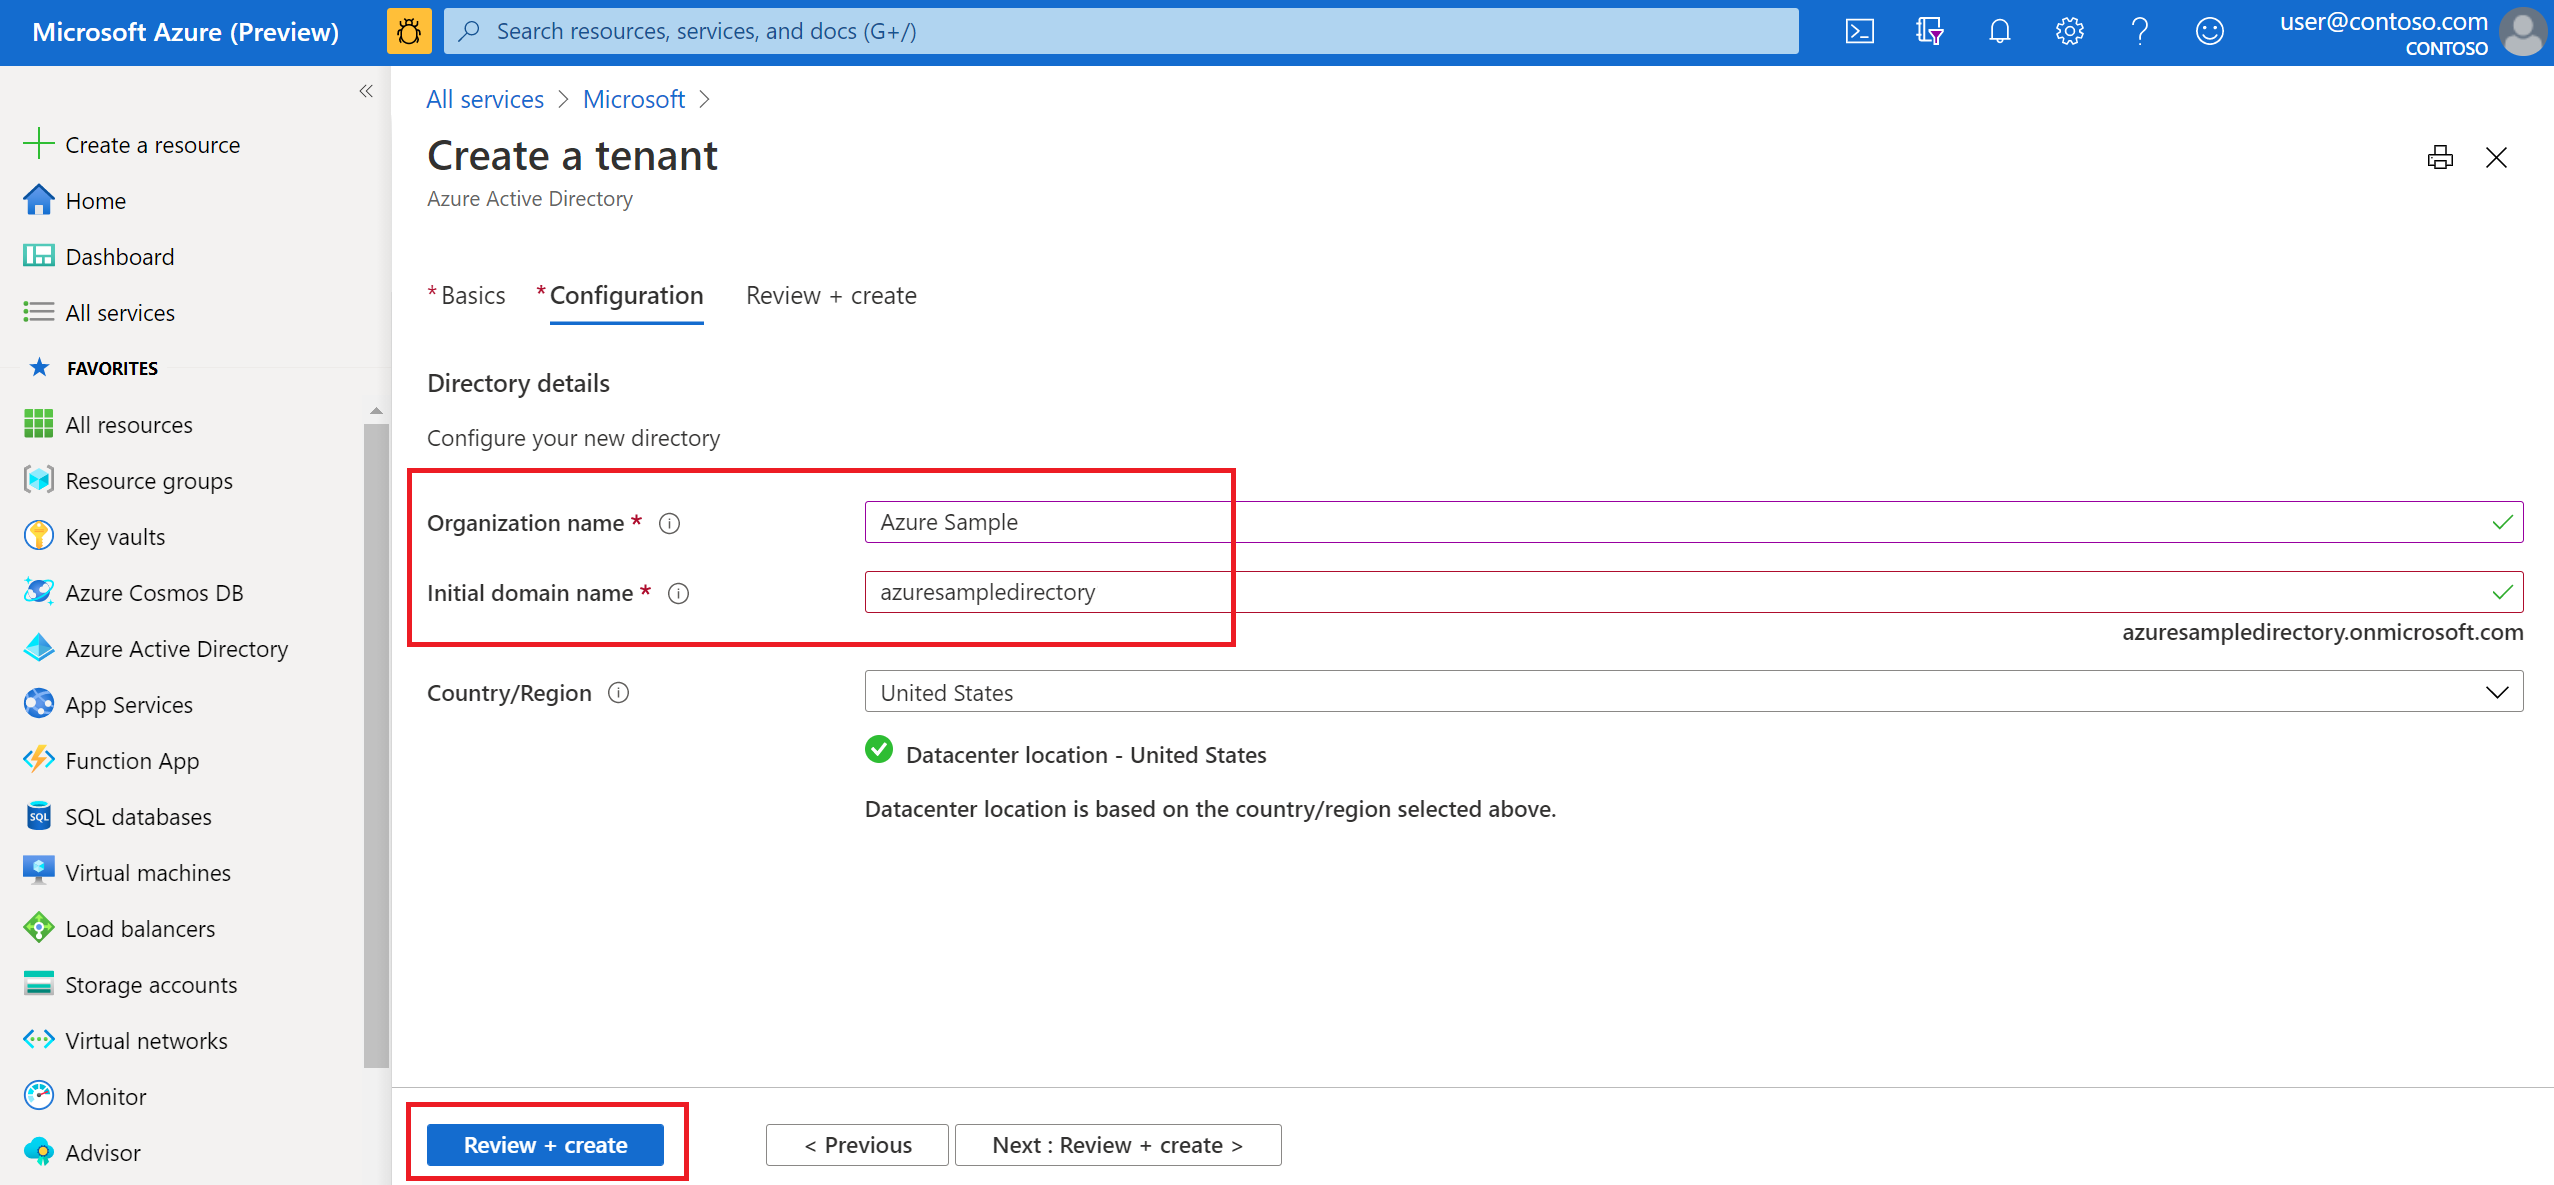 Screenshot of the Configuration section of the Azure Active Directory 'Create a tenant' screen.